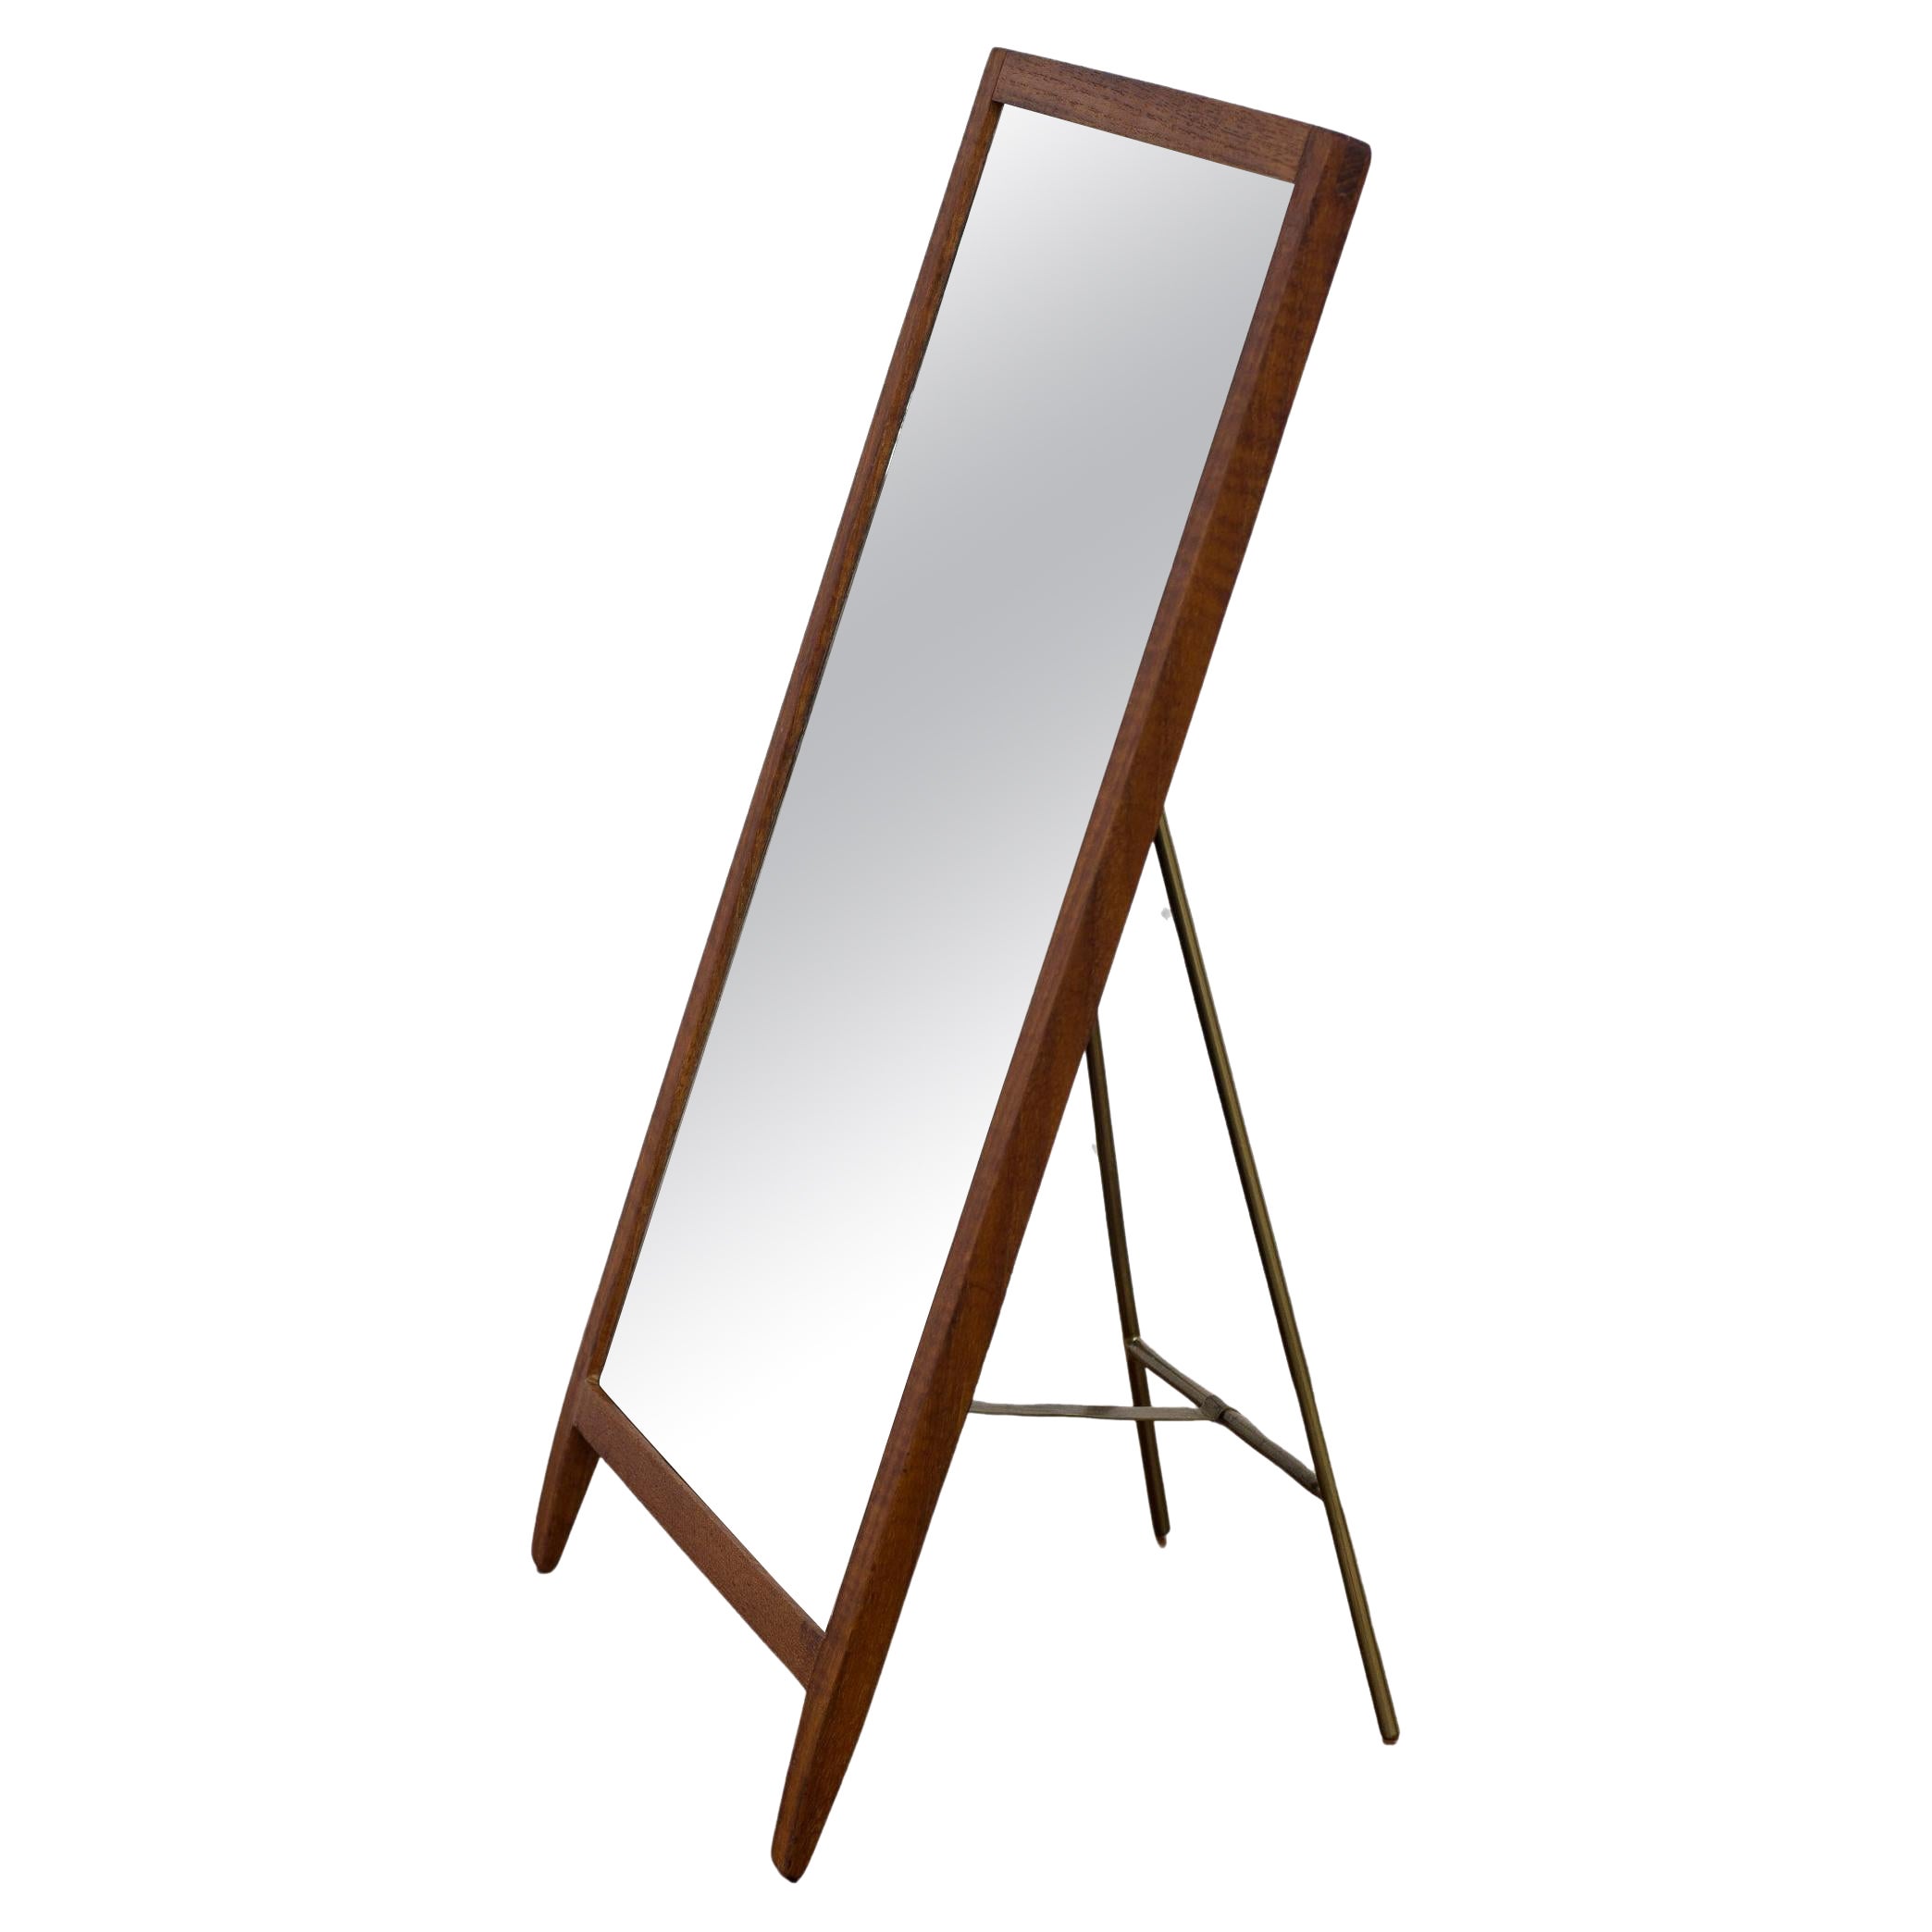 Table mirror in teak and brass by Hans-Agne Jakobsson, Sweden, 1950s